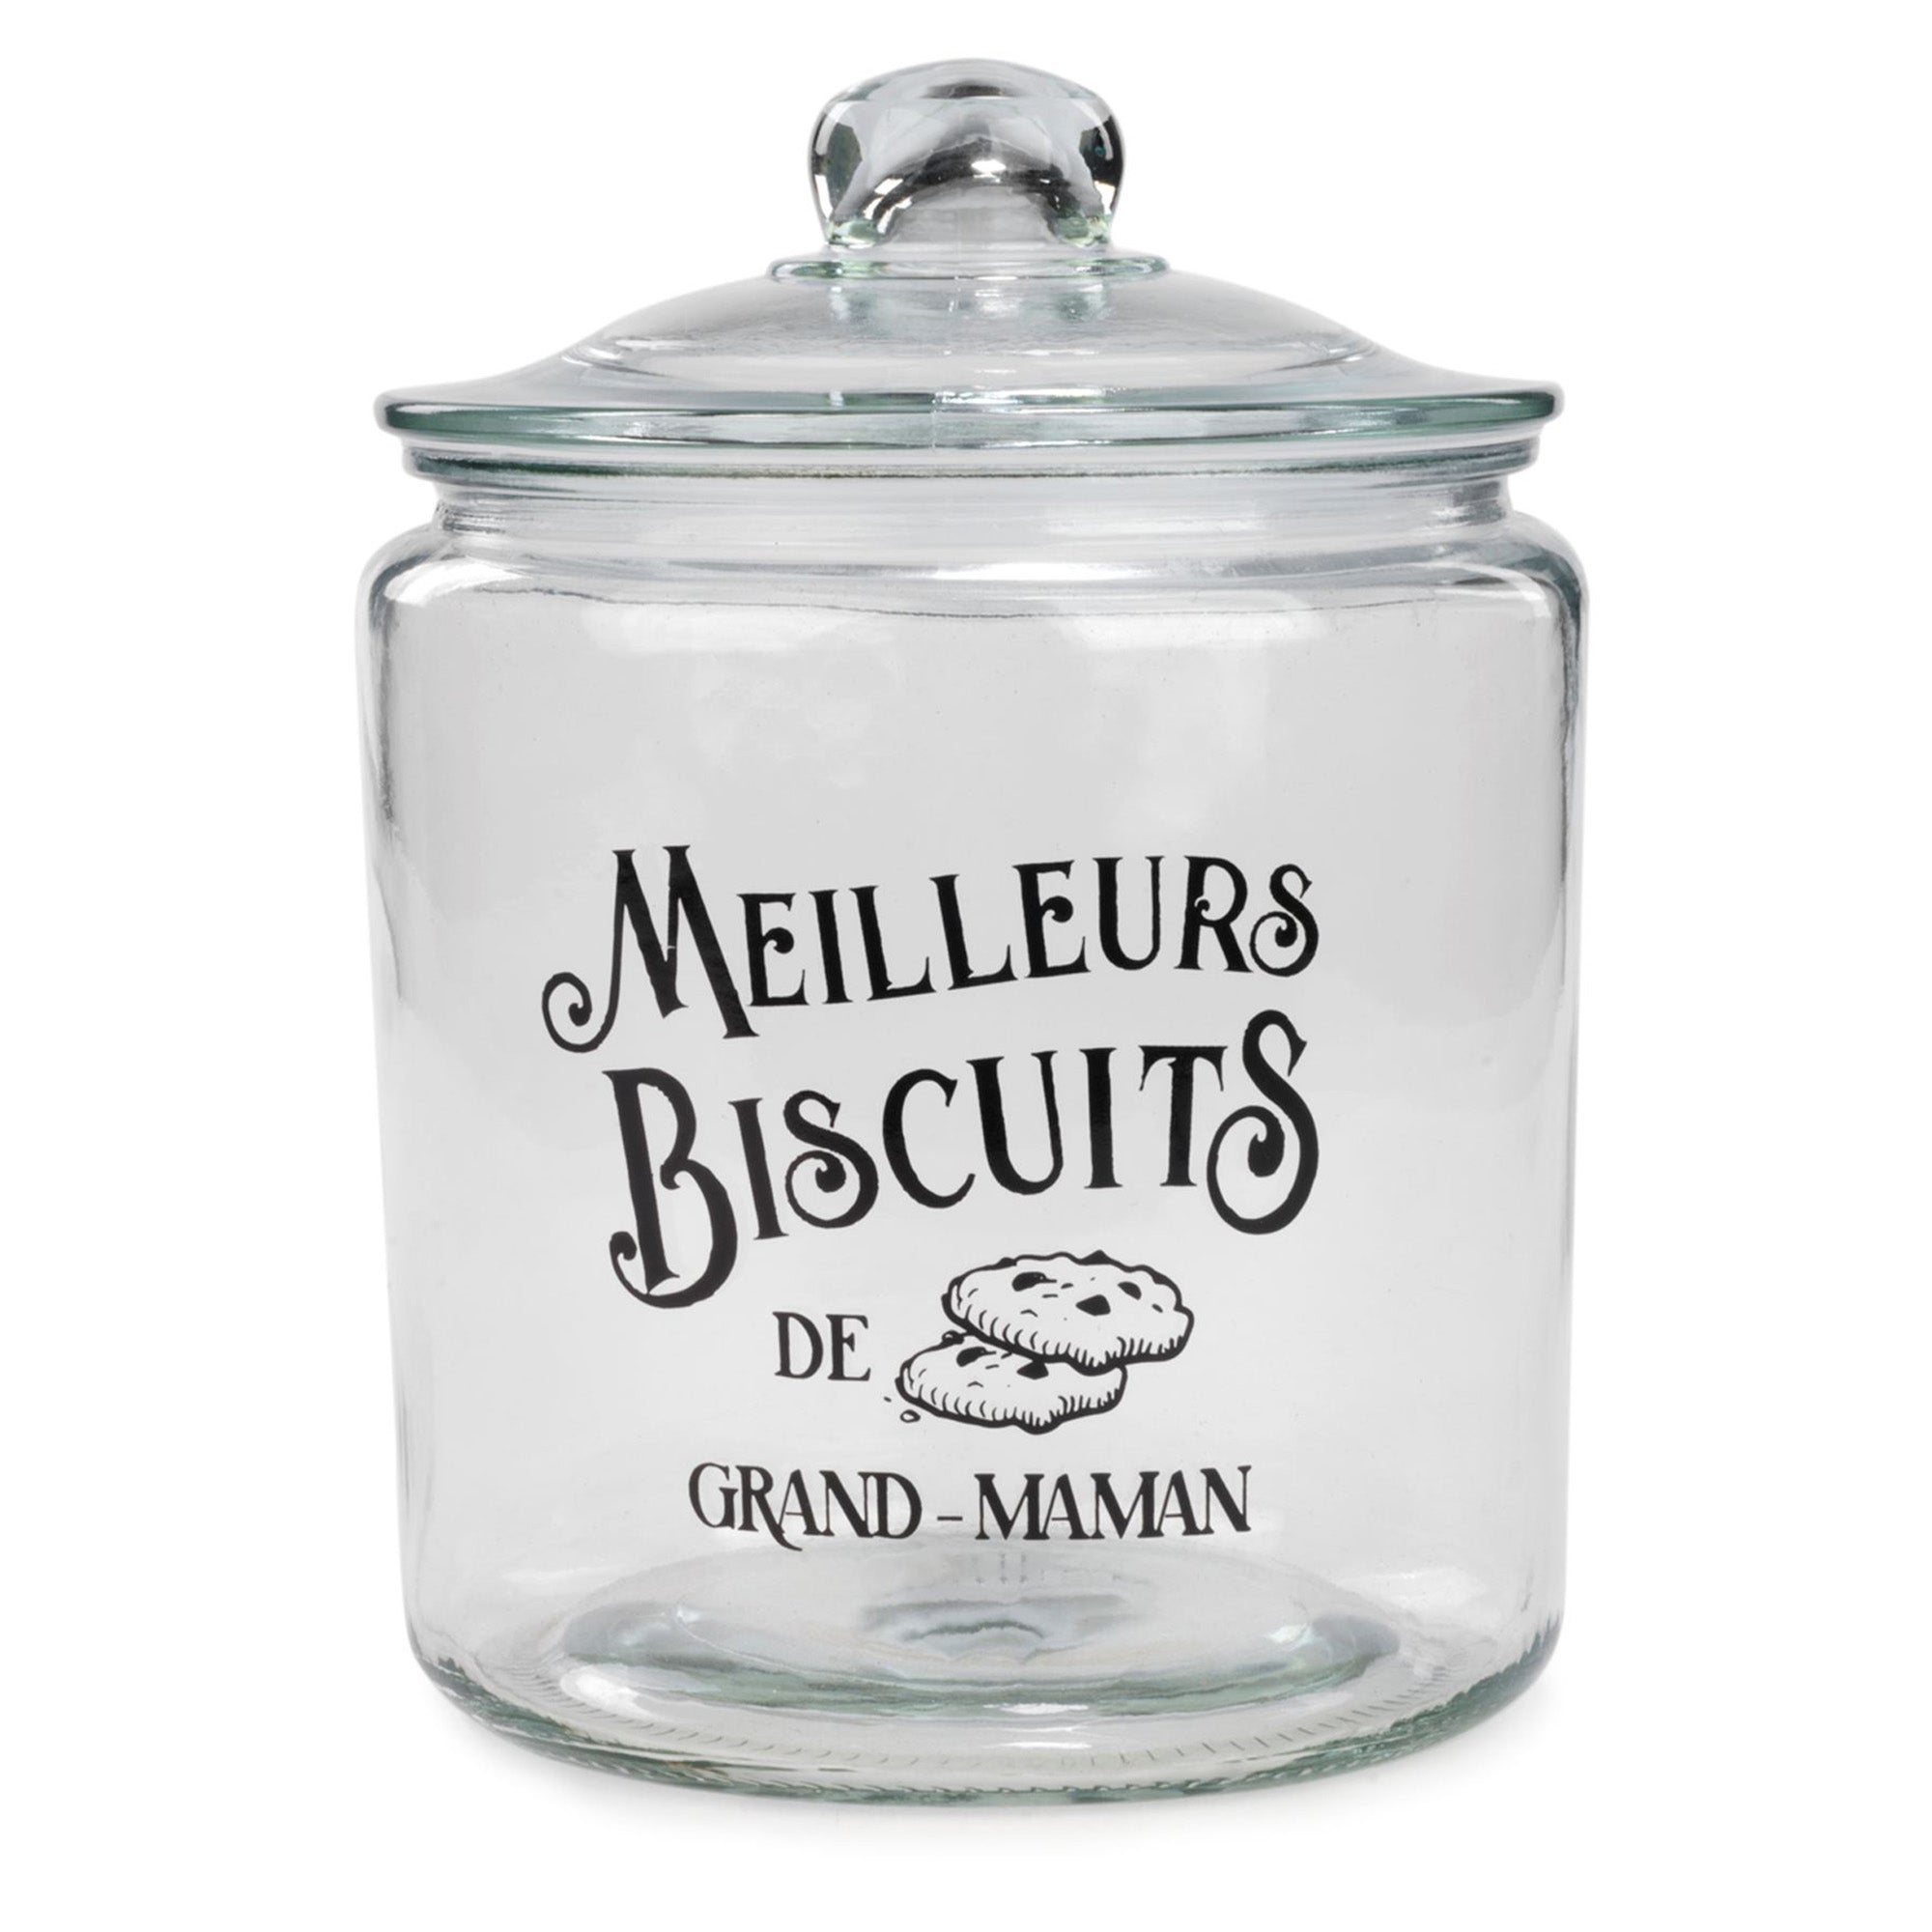 Glass Cookie Jar - Meilleurs Biscuits 7x10in         